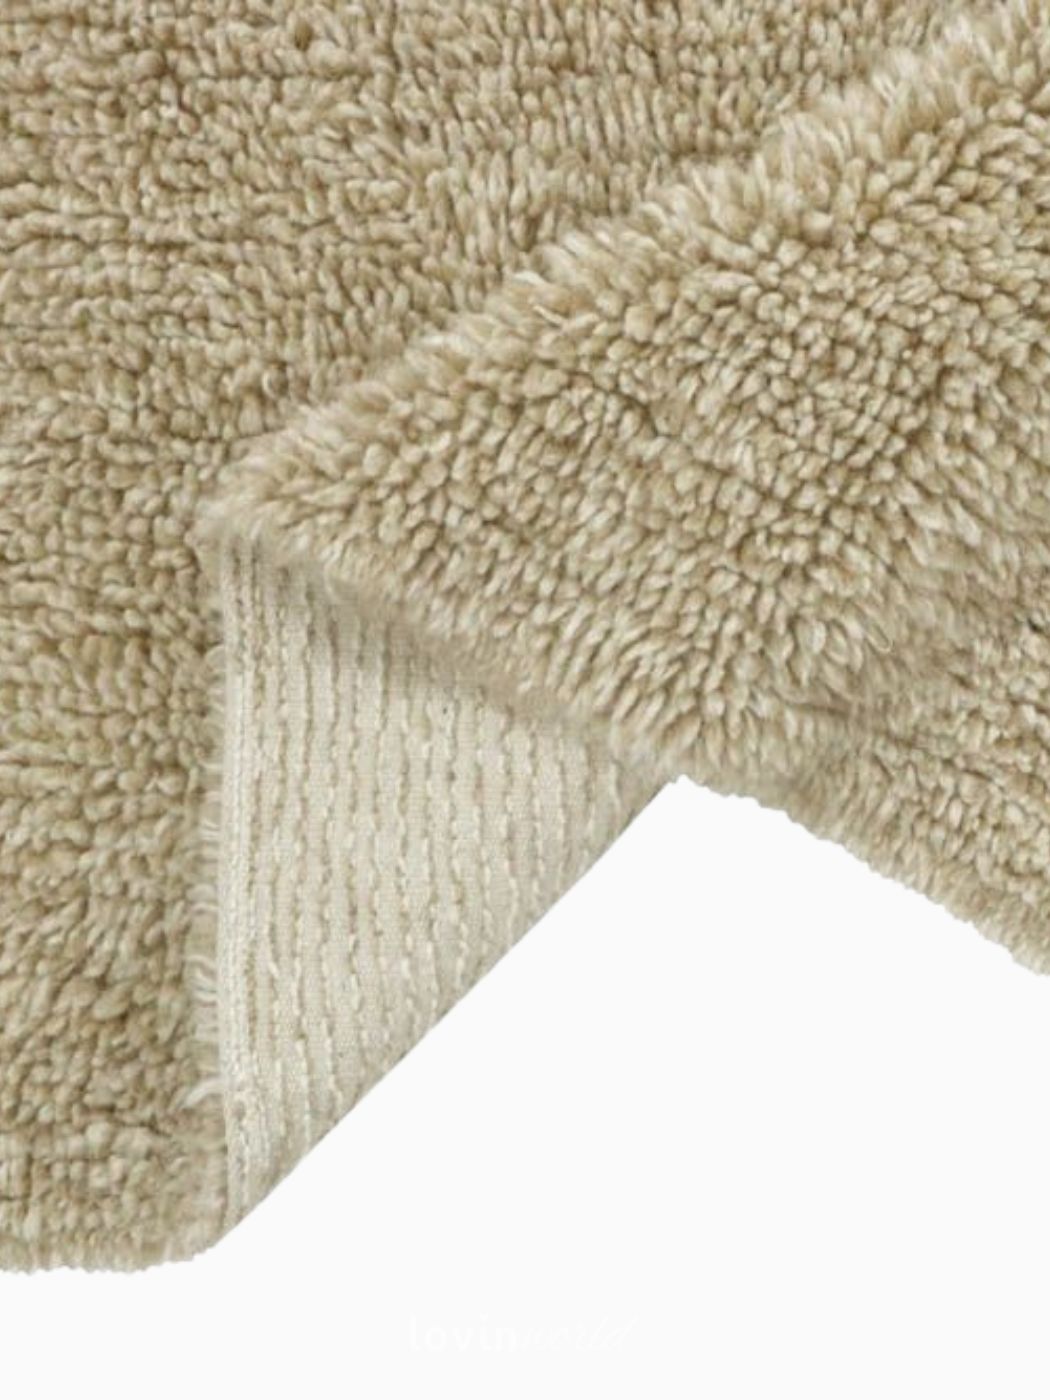 Tappeto di lana Tundra Blended Sheep, in colore beige-5